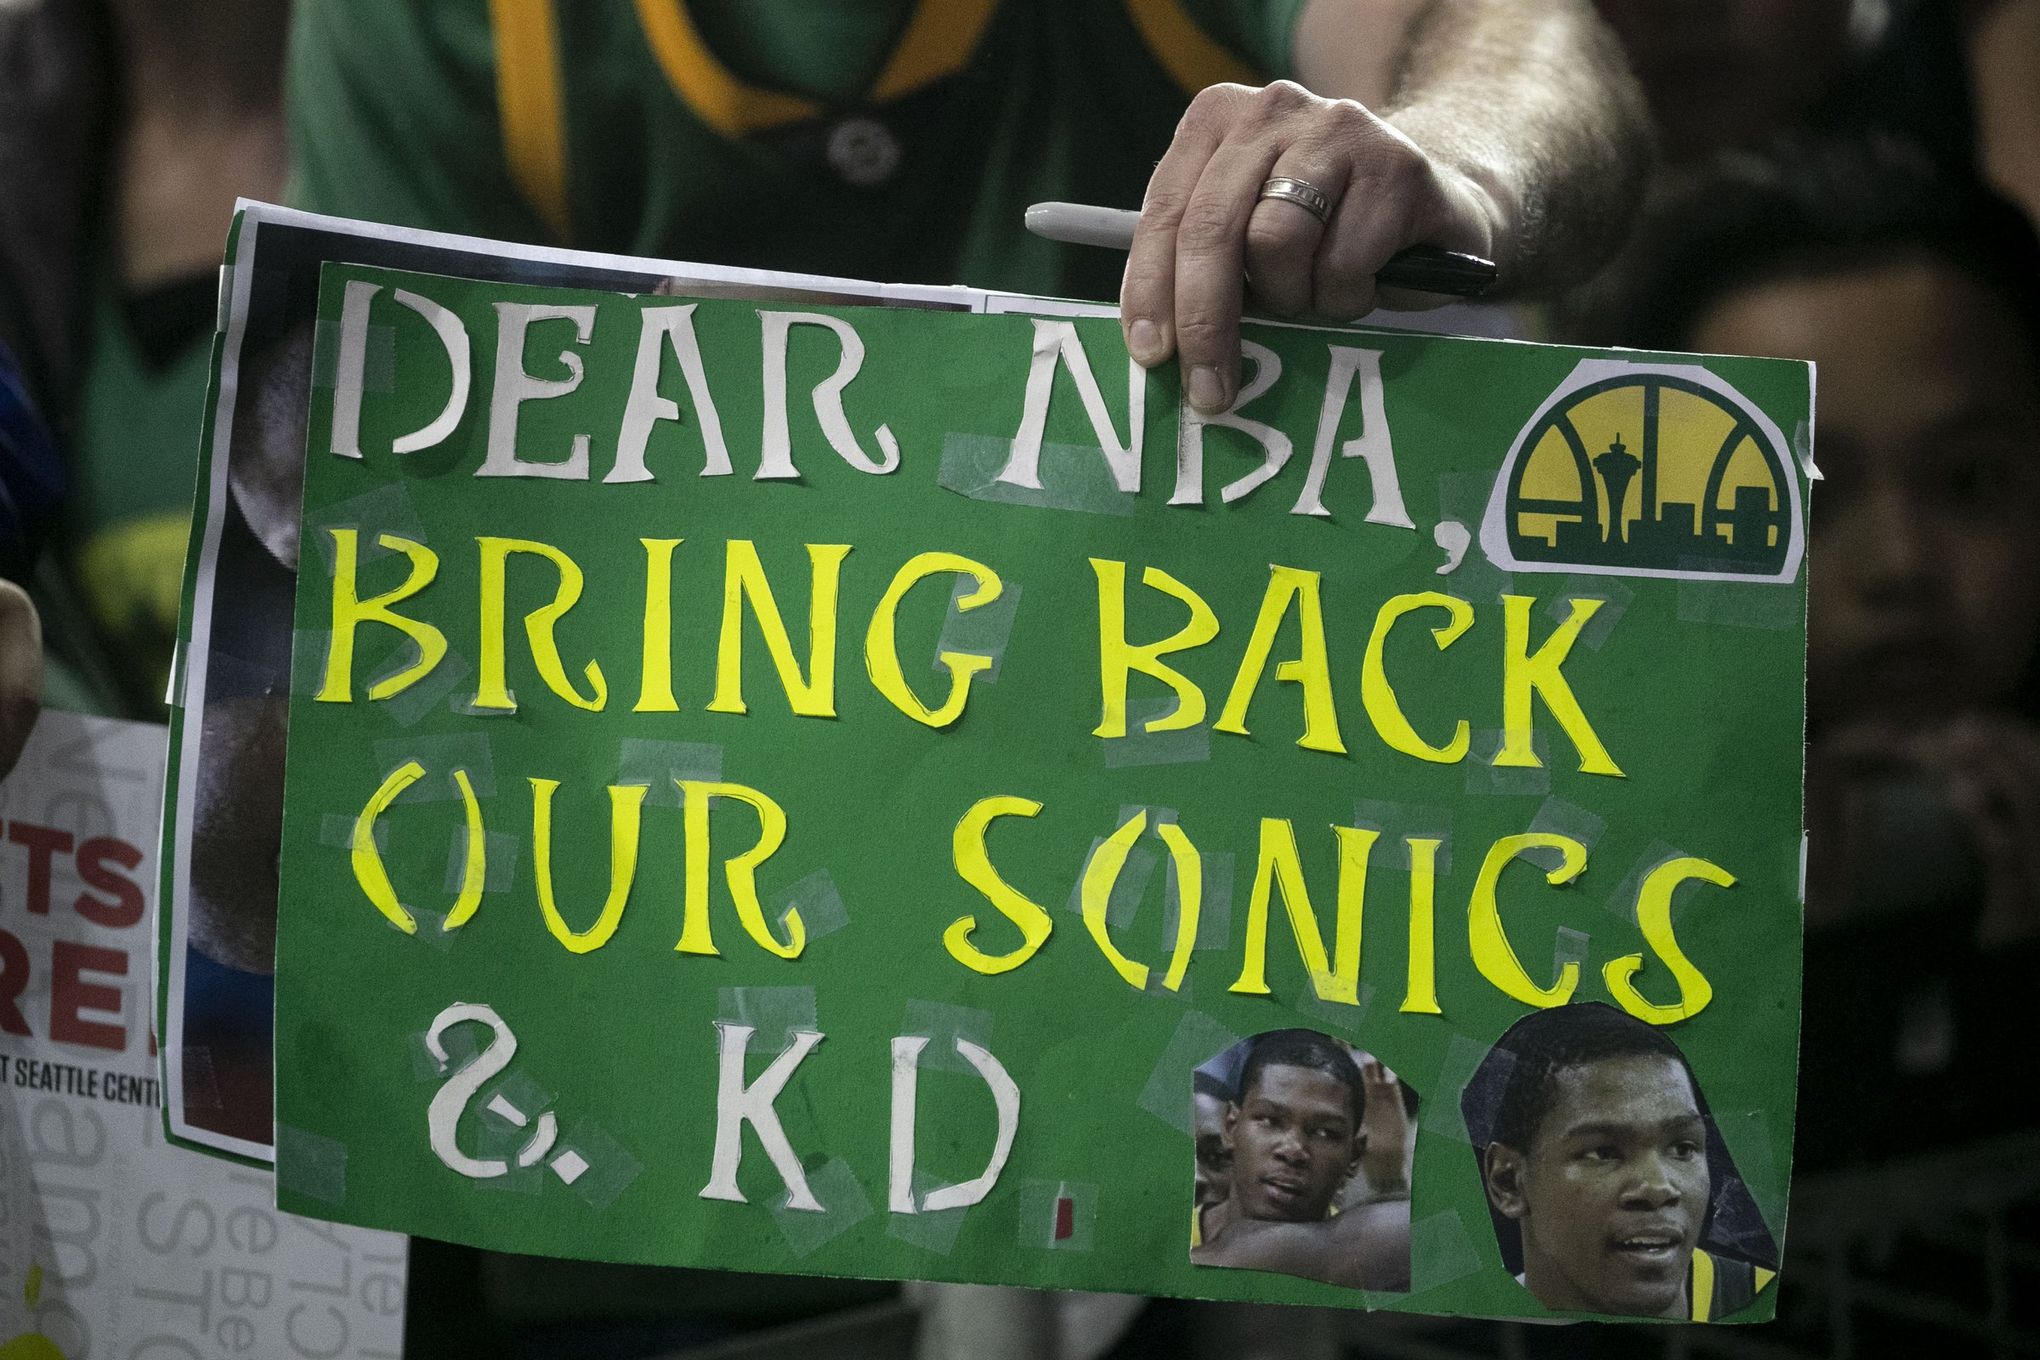 NBA returns to Seattle for 2nd preseason game. Will the Sonics be next?